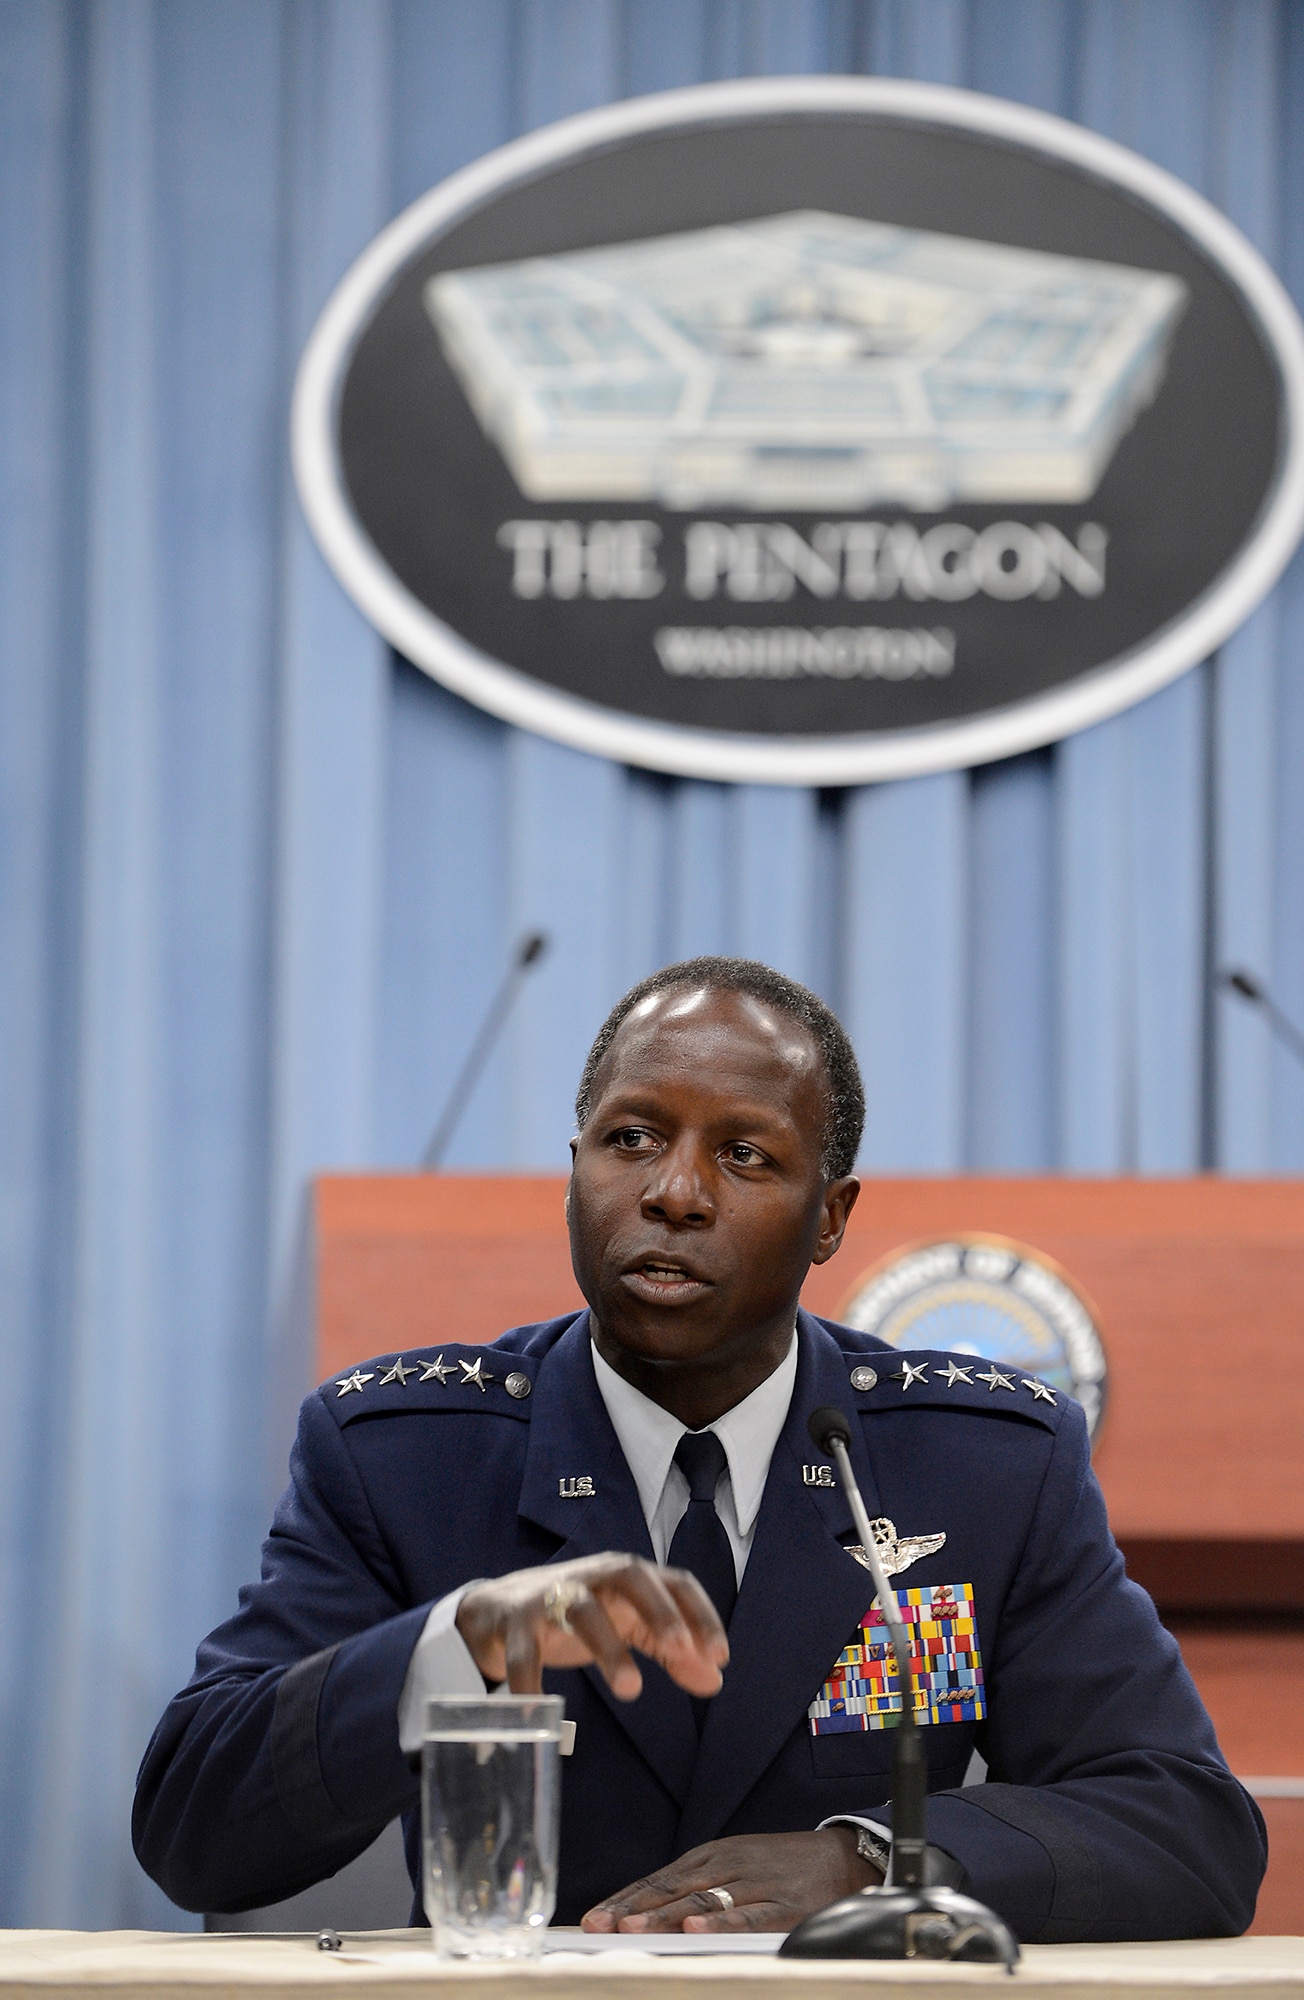 Gen. Edward Rice Jr., commander of Air Education and Training Command, answers during a Pentagon press briefing on Nov. 14, 2012.  Rice presented the investigation findings from allegations of sexual misconduct at Basic Military Training.  Also at the press briefing was Maj. Gen. Margaret Woodward, Air Force Chief of Safety and commander of Air Force Safety Center at Kirtland Air Force Base, N.M., who led the investigation.  (U.S. Air Force photo/Scott M. Ash)